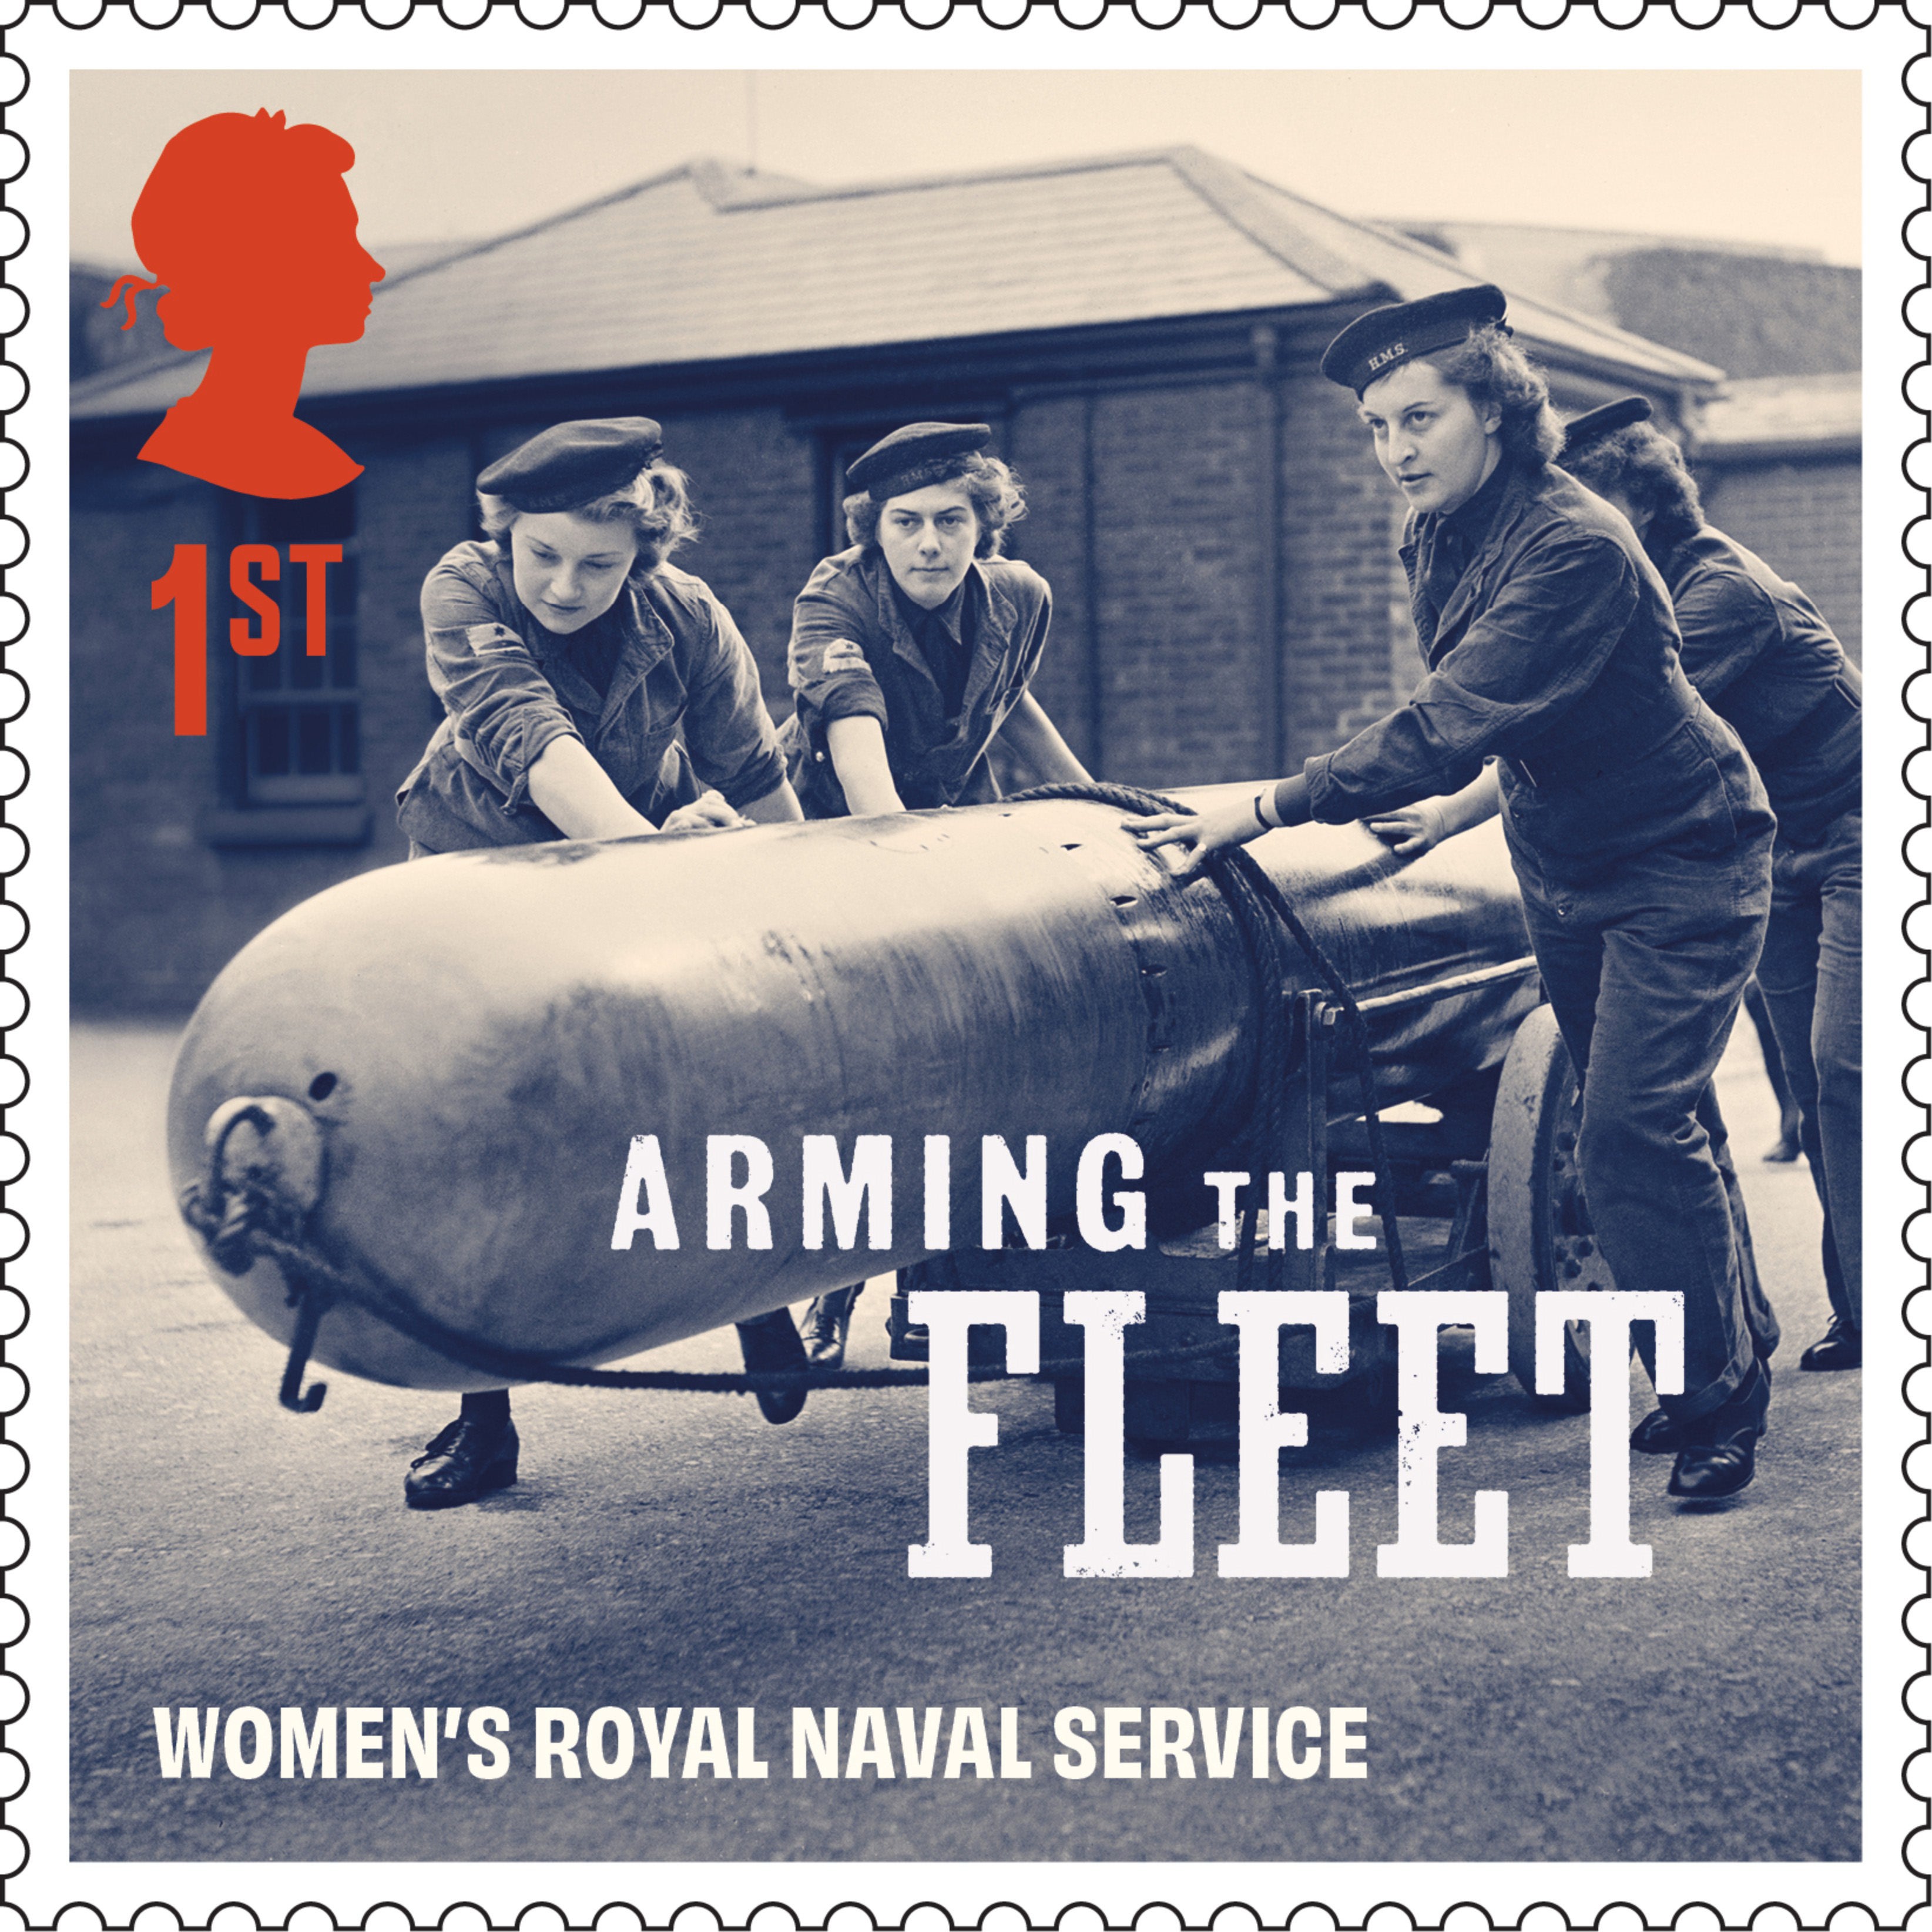 A further four stamps, presented in a miniature sheet, showcase the brave work of the ferry pilots of the Air Transport Auxiliary – known as the Spitfire Women